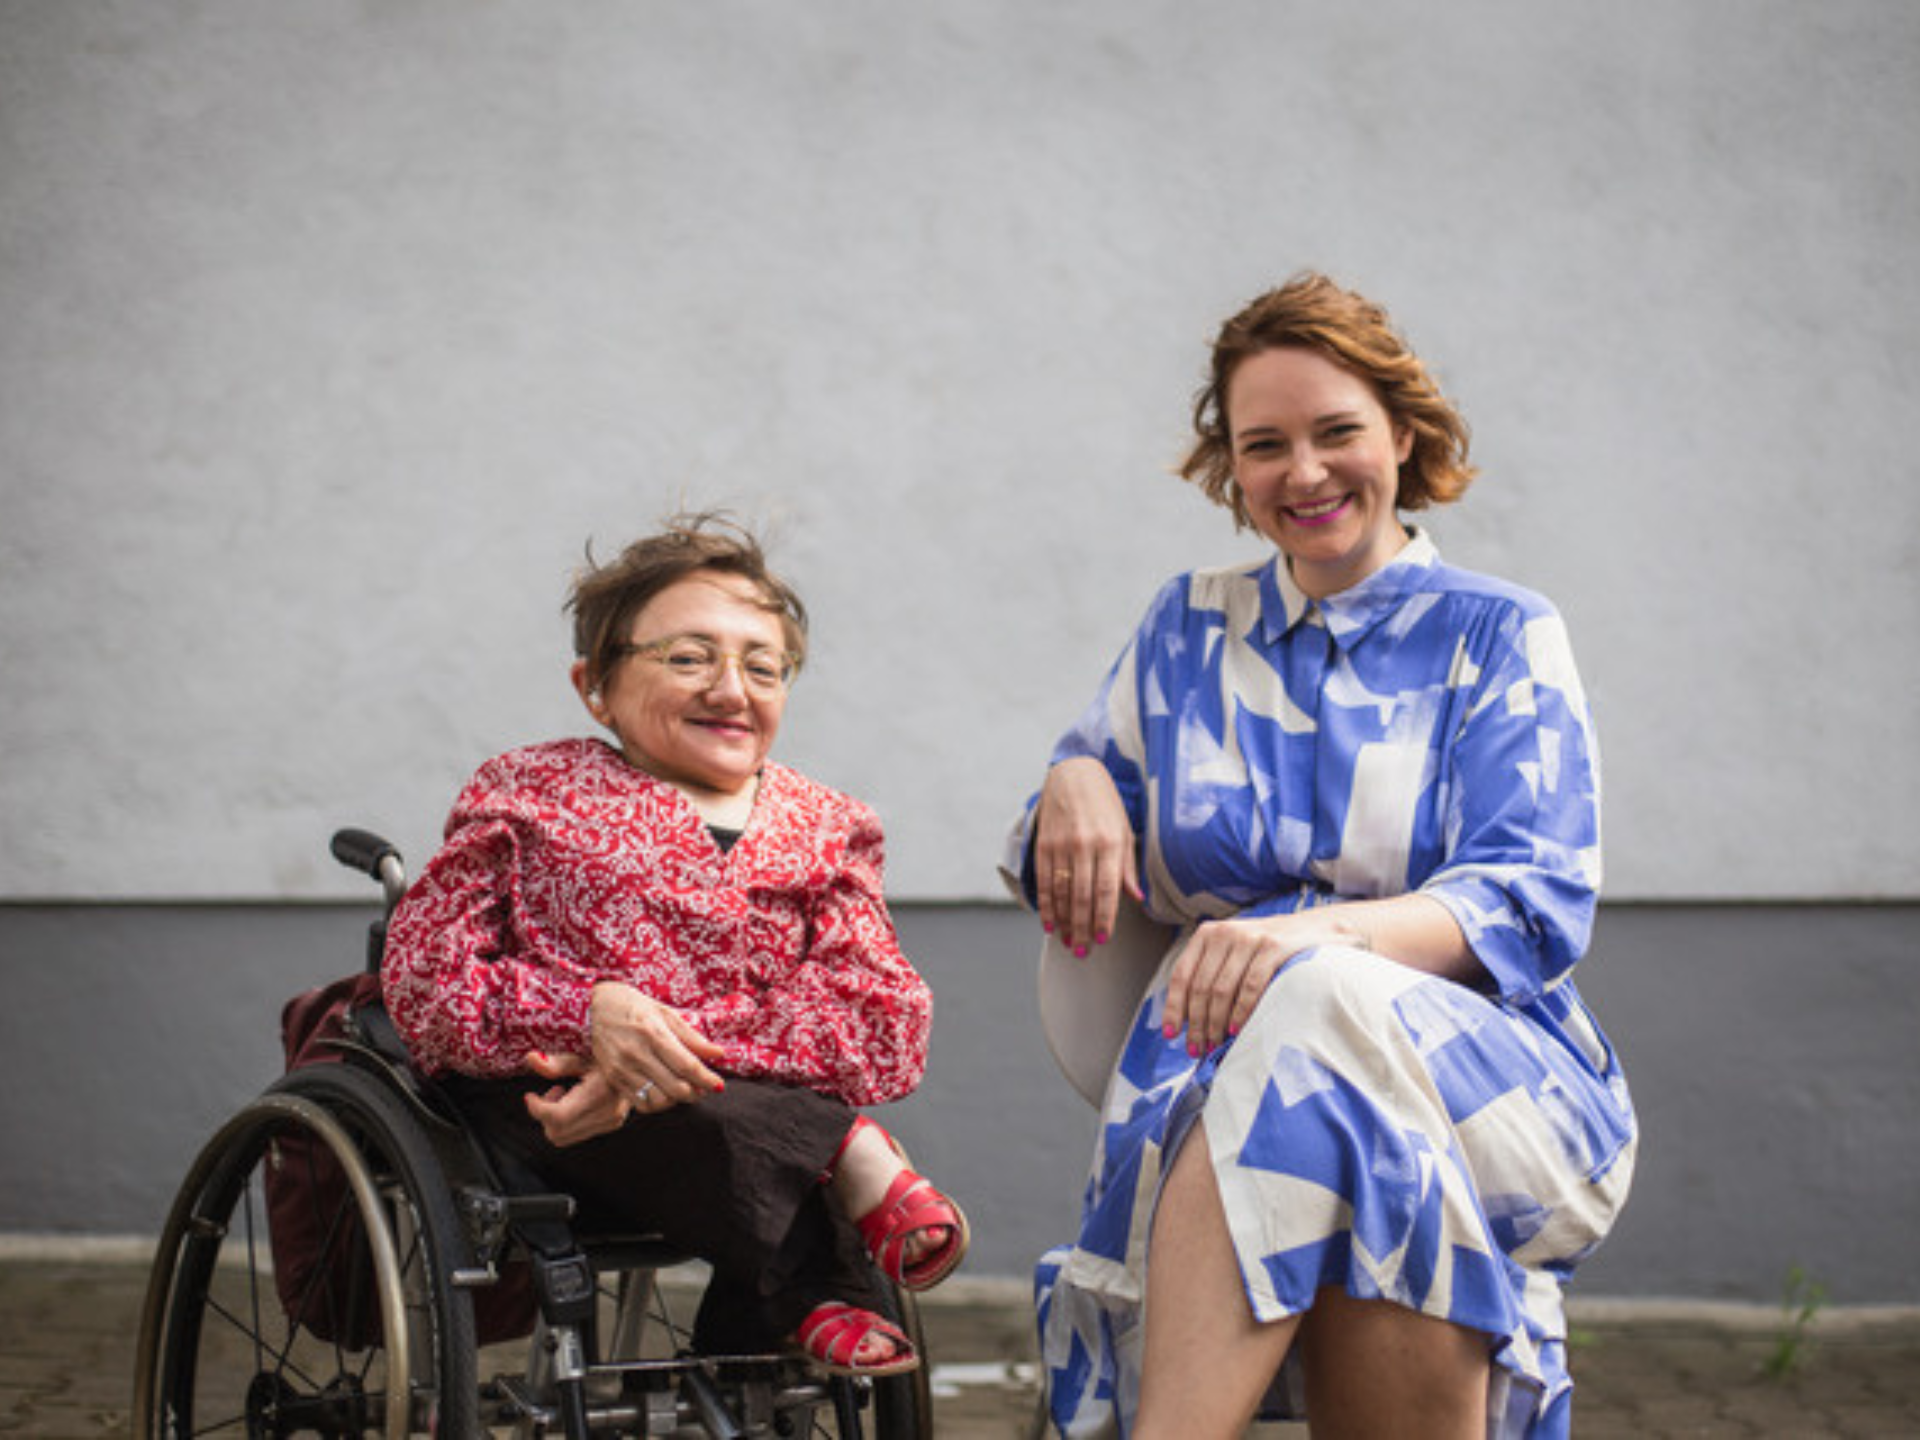 Book Launch | “Are you disabled or what?” by Rebecca Maskos and Mareice Kaiser